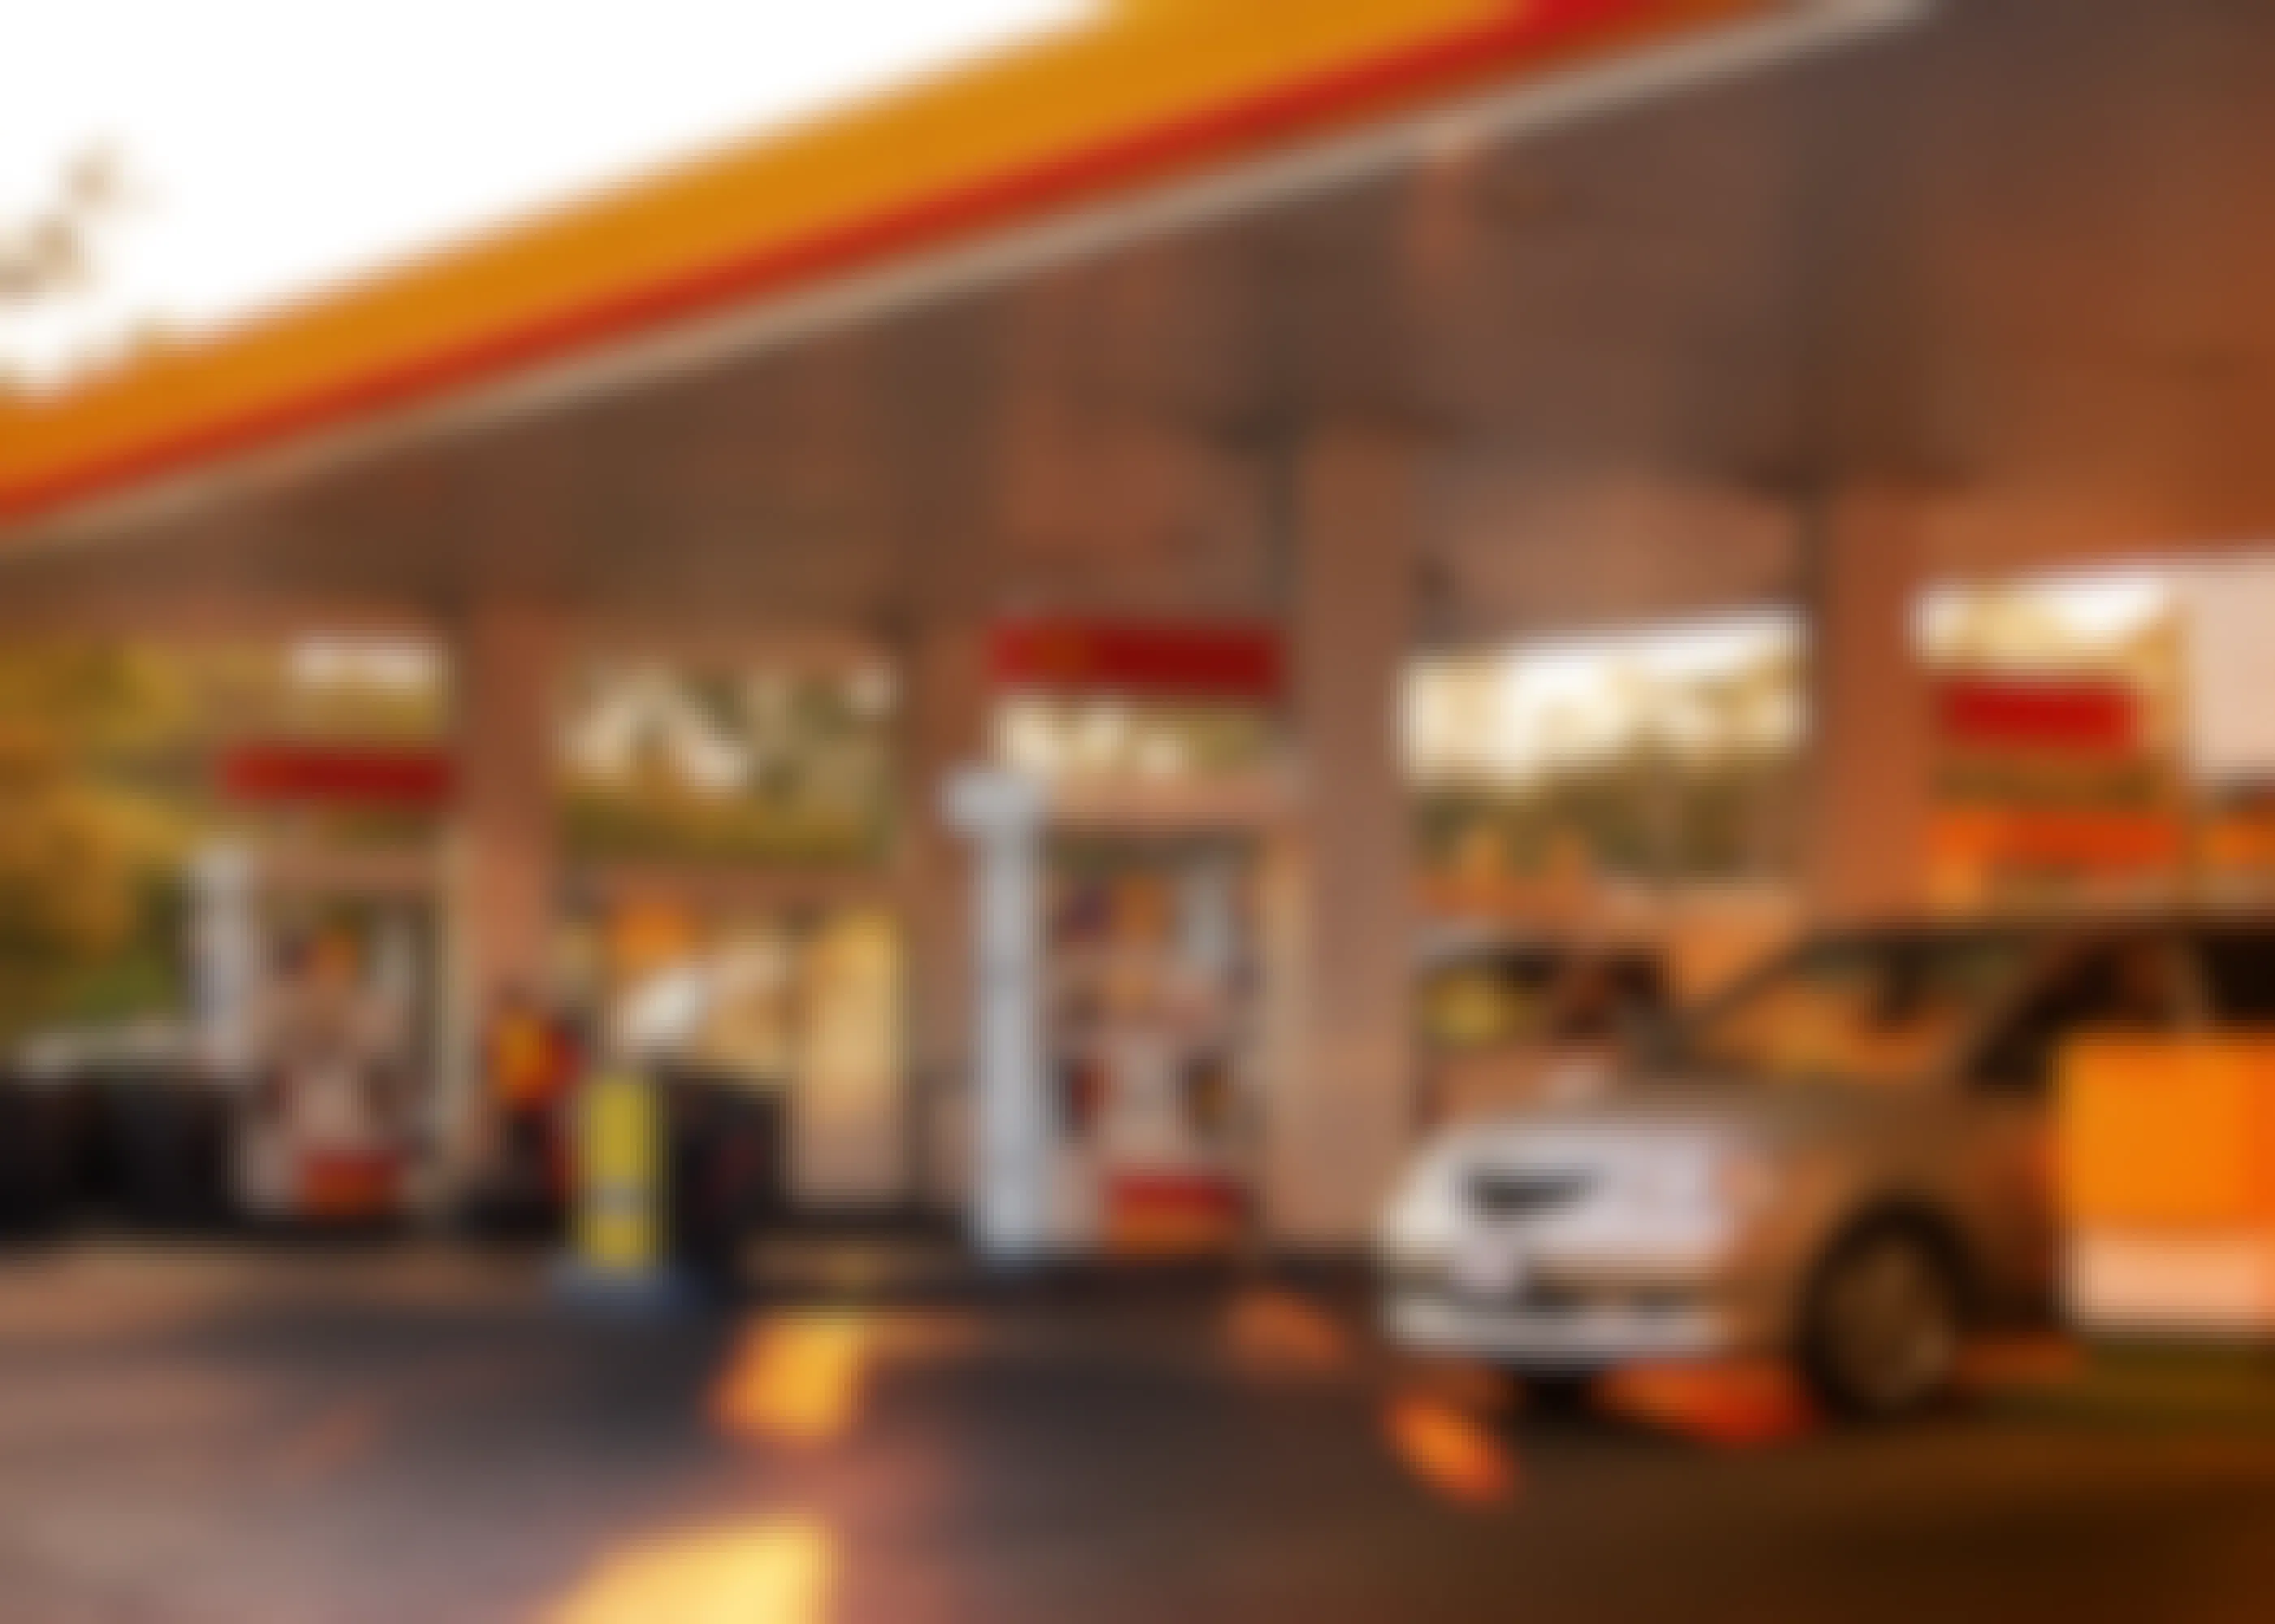 Shell Gas station with a car parked at one of the gas pumps